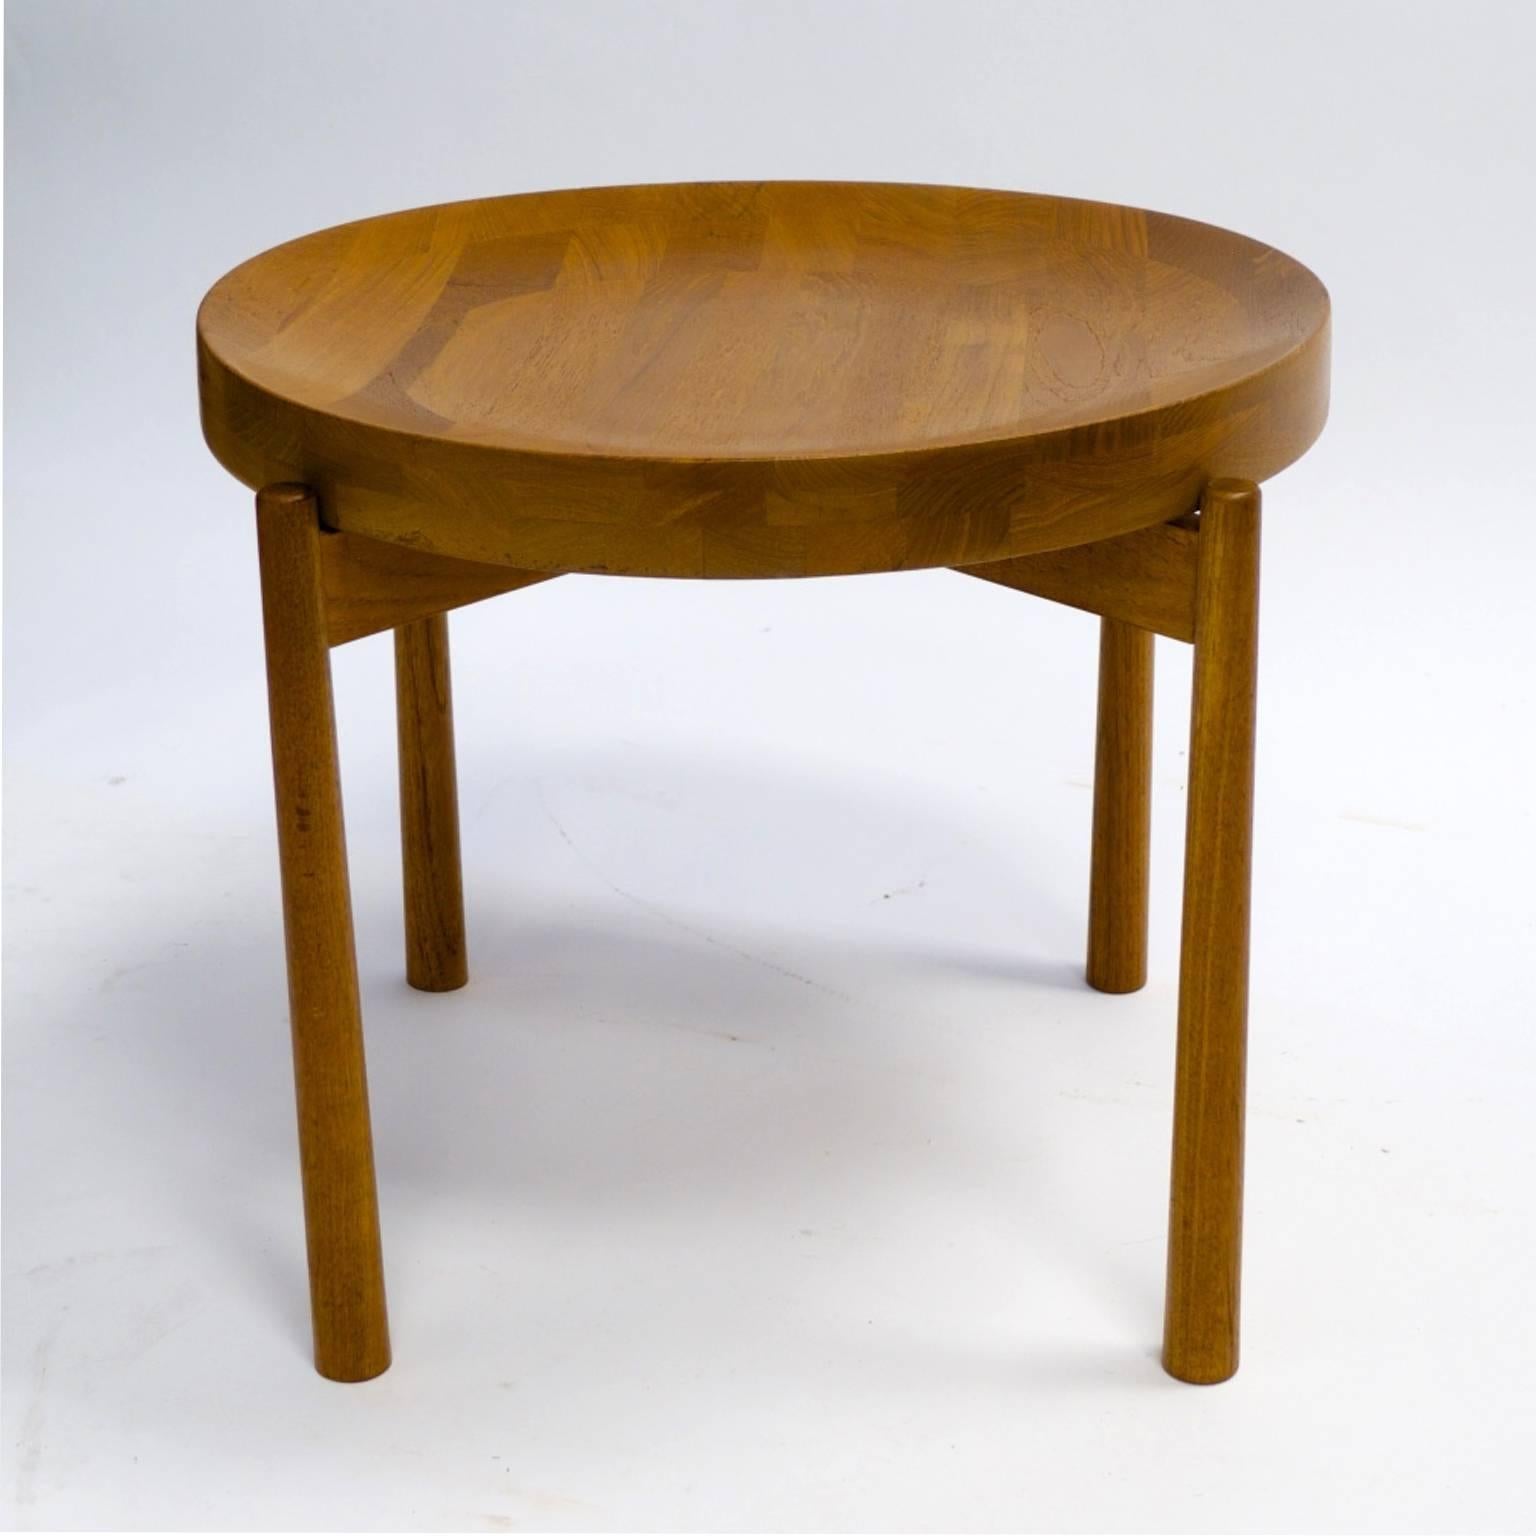 Mid-20th Century Pair of DUX Flip-Top Teak Tables in the manner of Jens Quistgaard